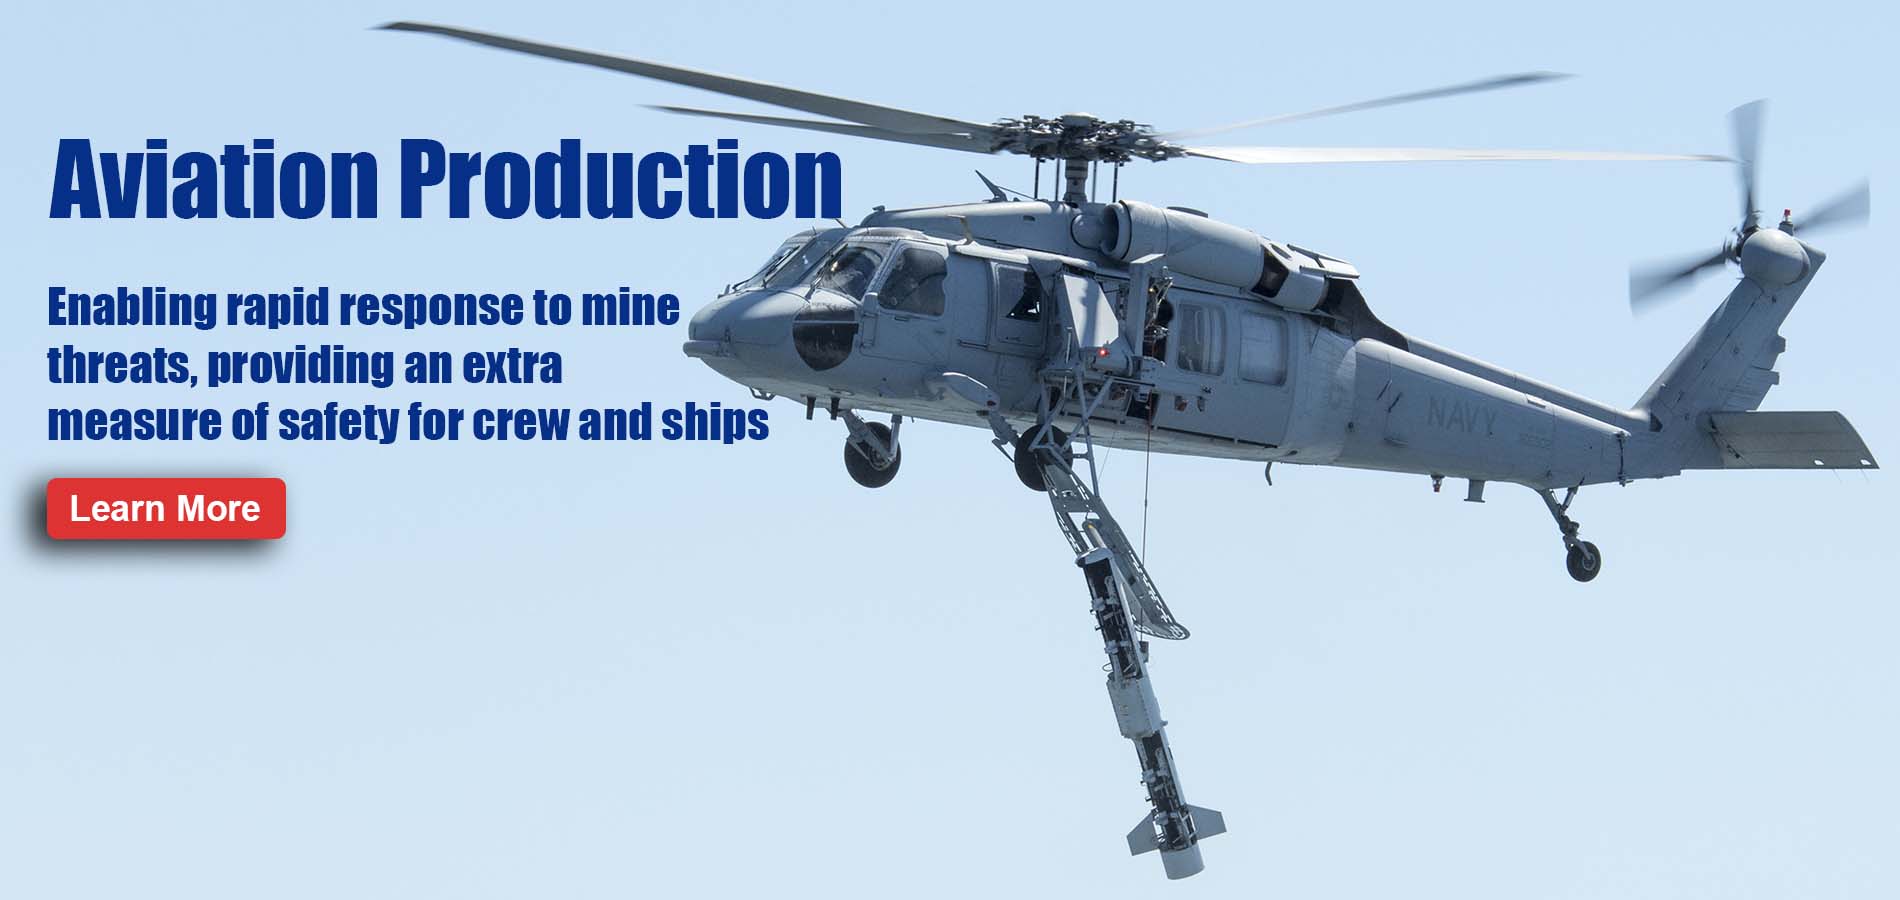 Aviation Production. Enabling rapid response to mine threats, providing an extra measure of safety for crew and ships